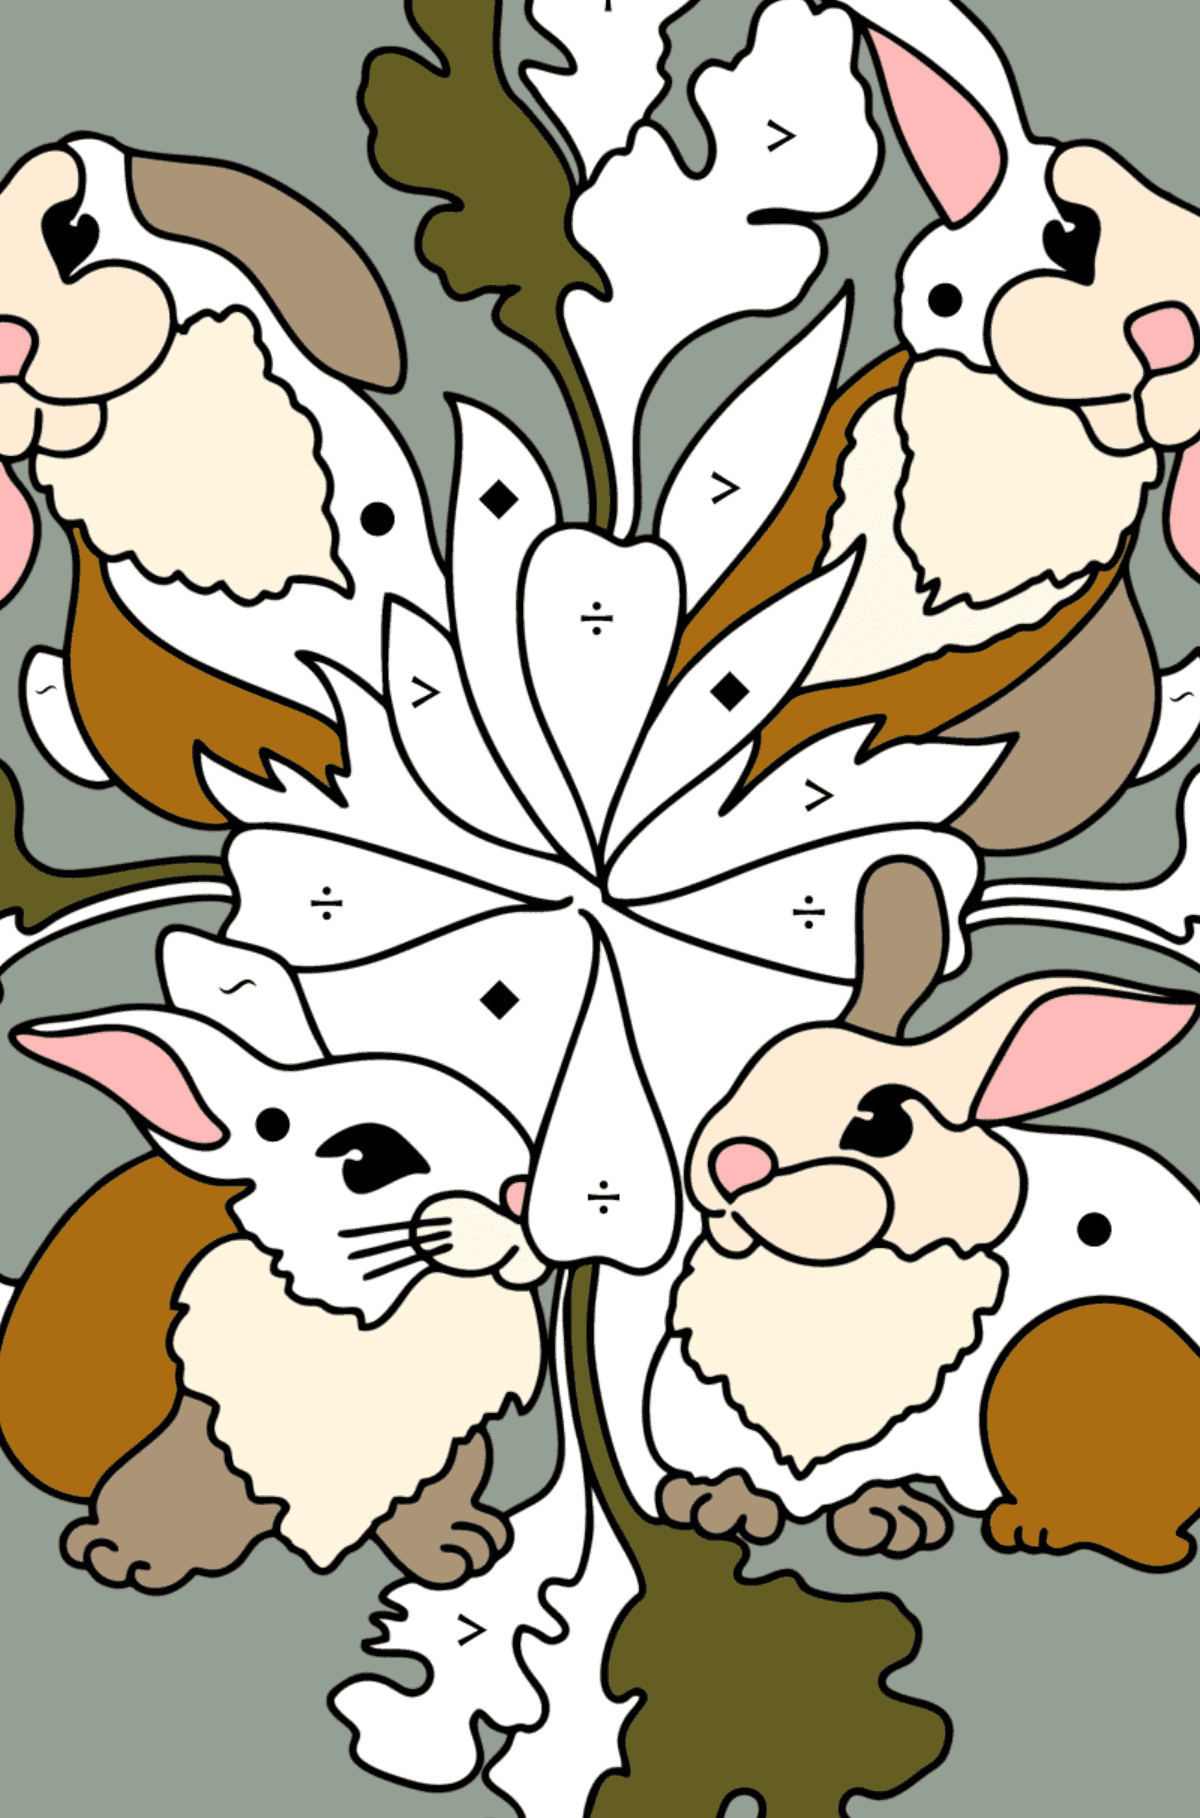 Mandala Bunny coloring page - Coloring by Symbols for Kids